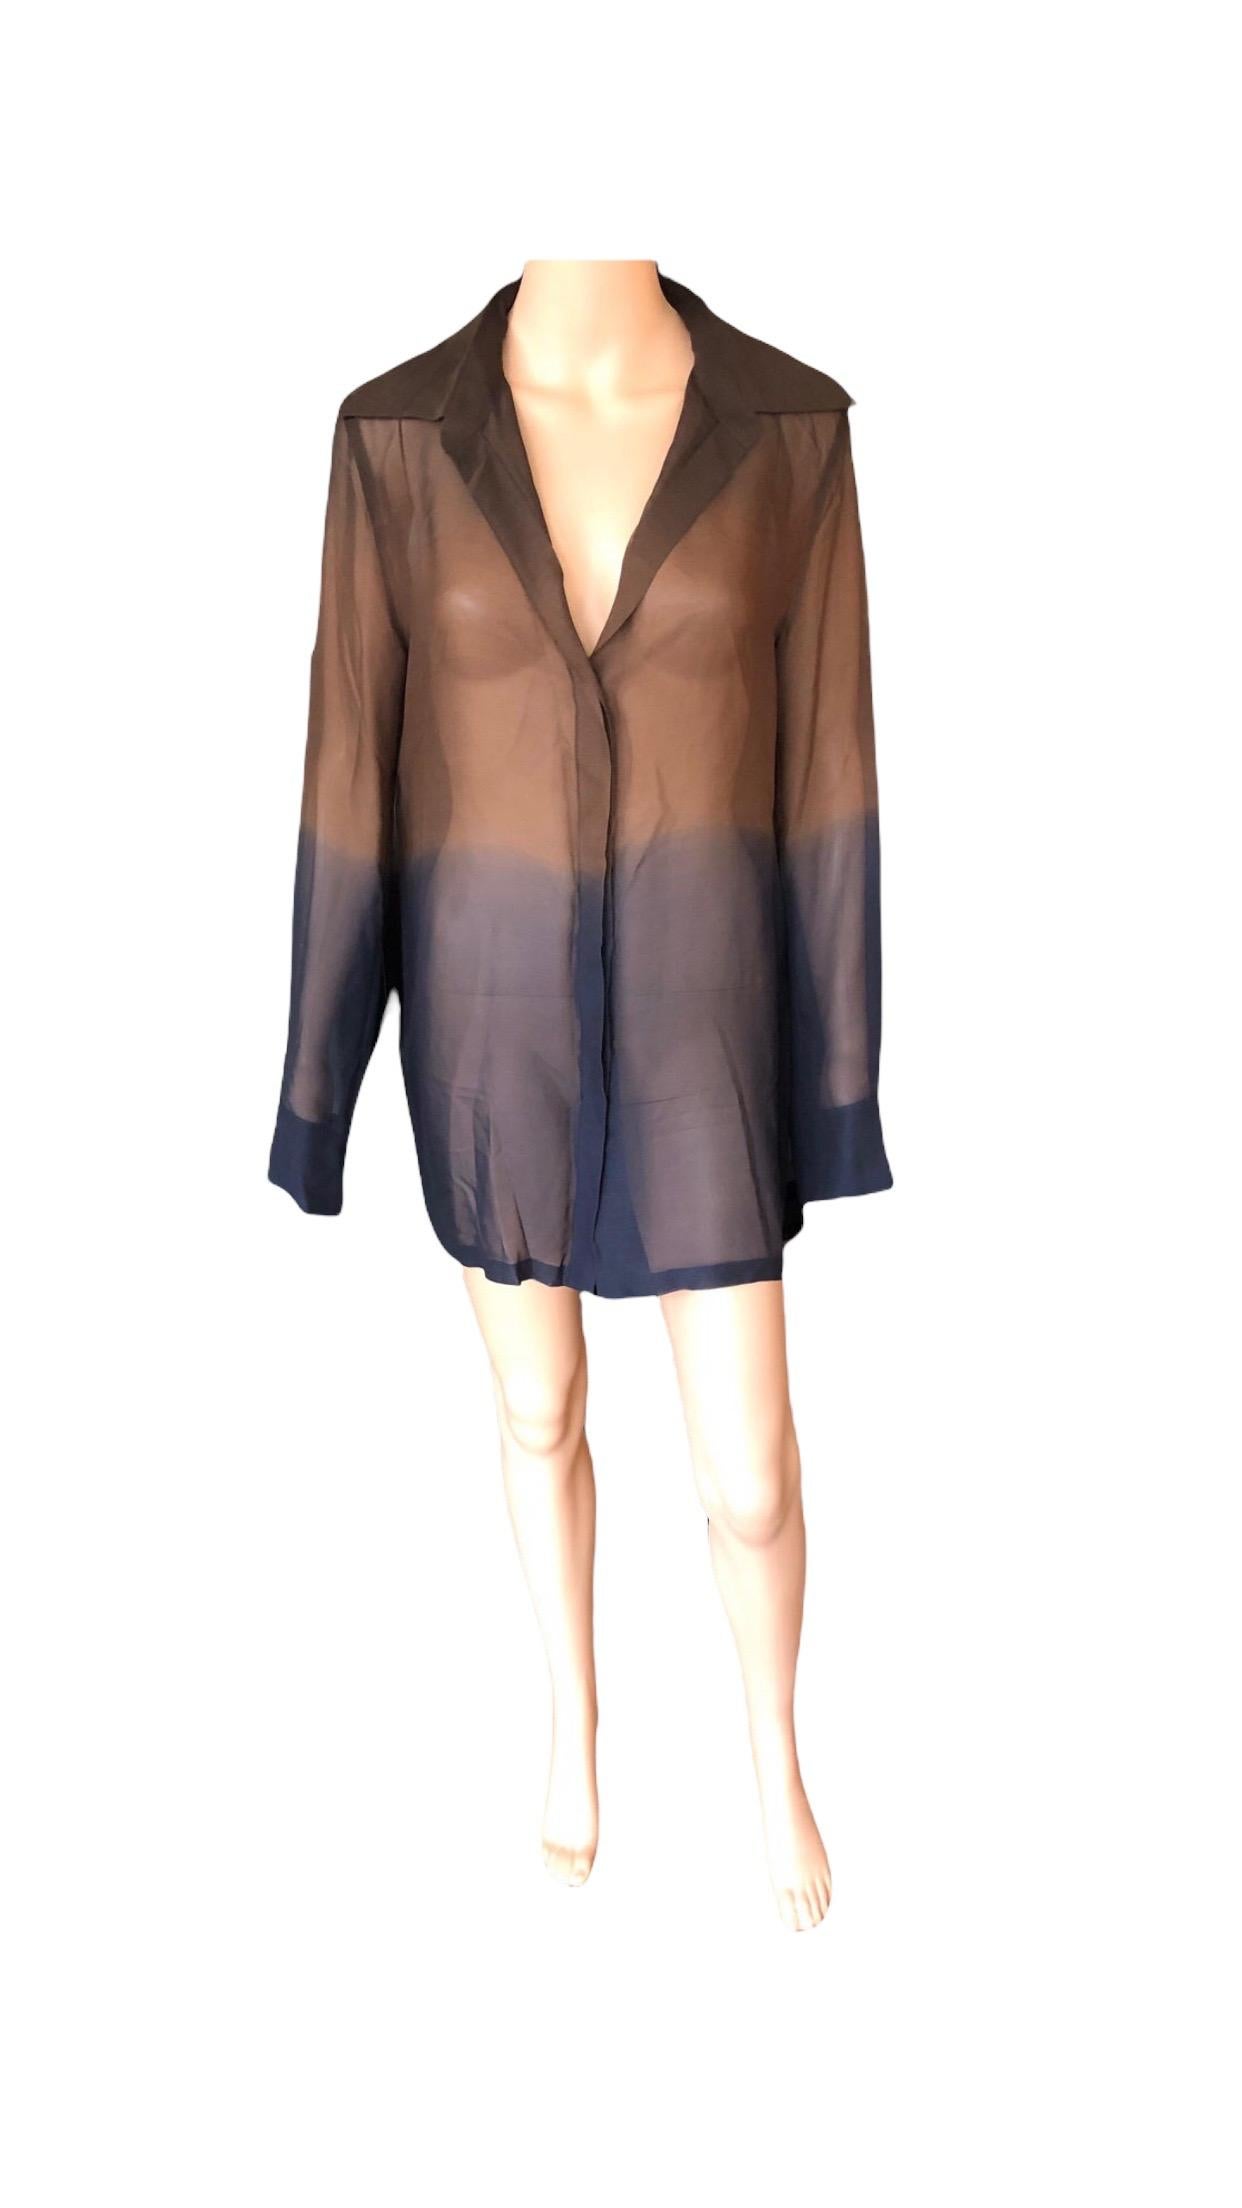 Gucci by Tom Ford 1997 Vintage Sheer Brown & Blue Ombre Silk Tunic Top For Sale 9